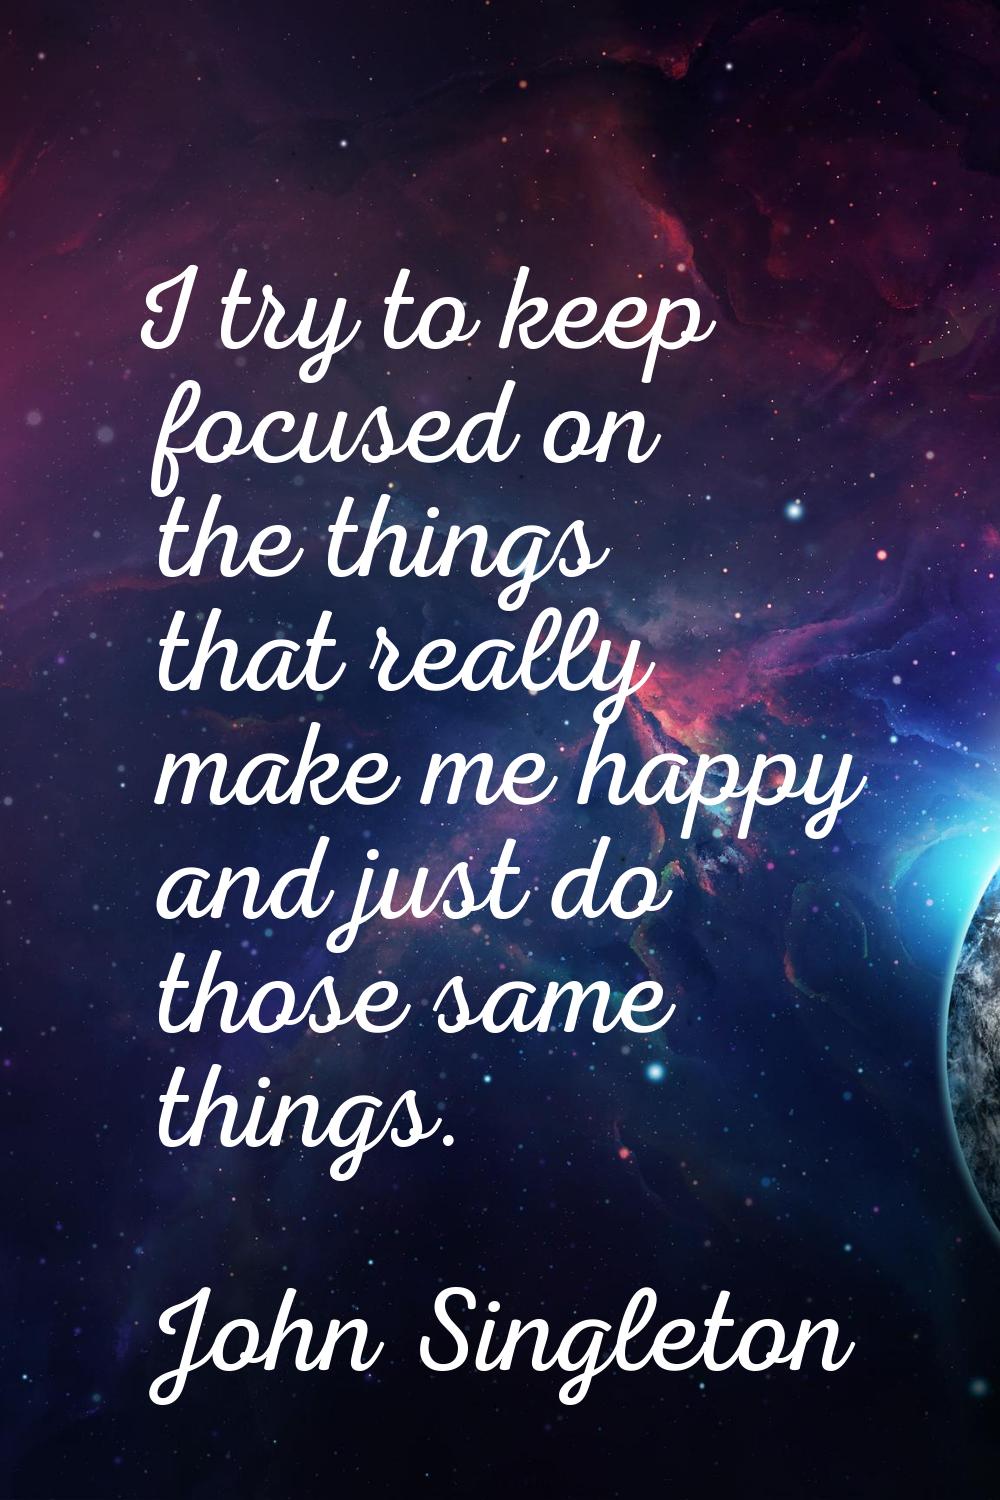 I try to keep focused on the things that really make me happy and just do those same things.